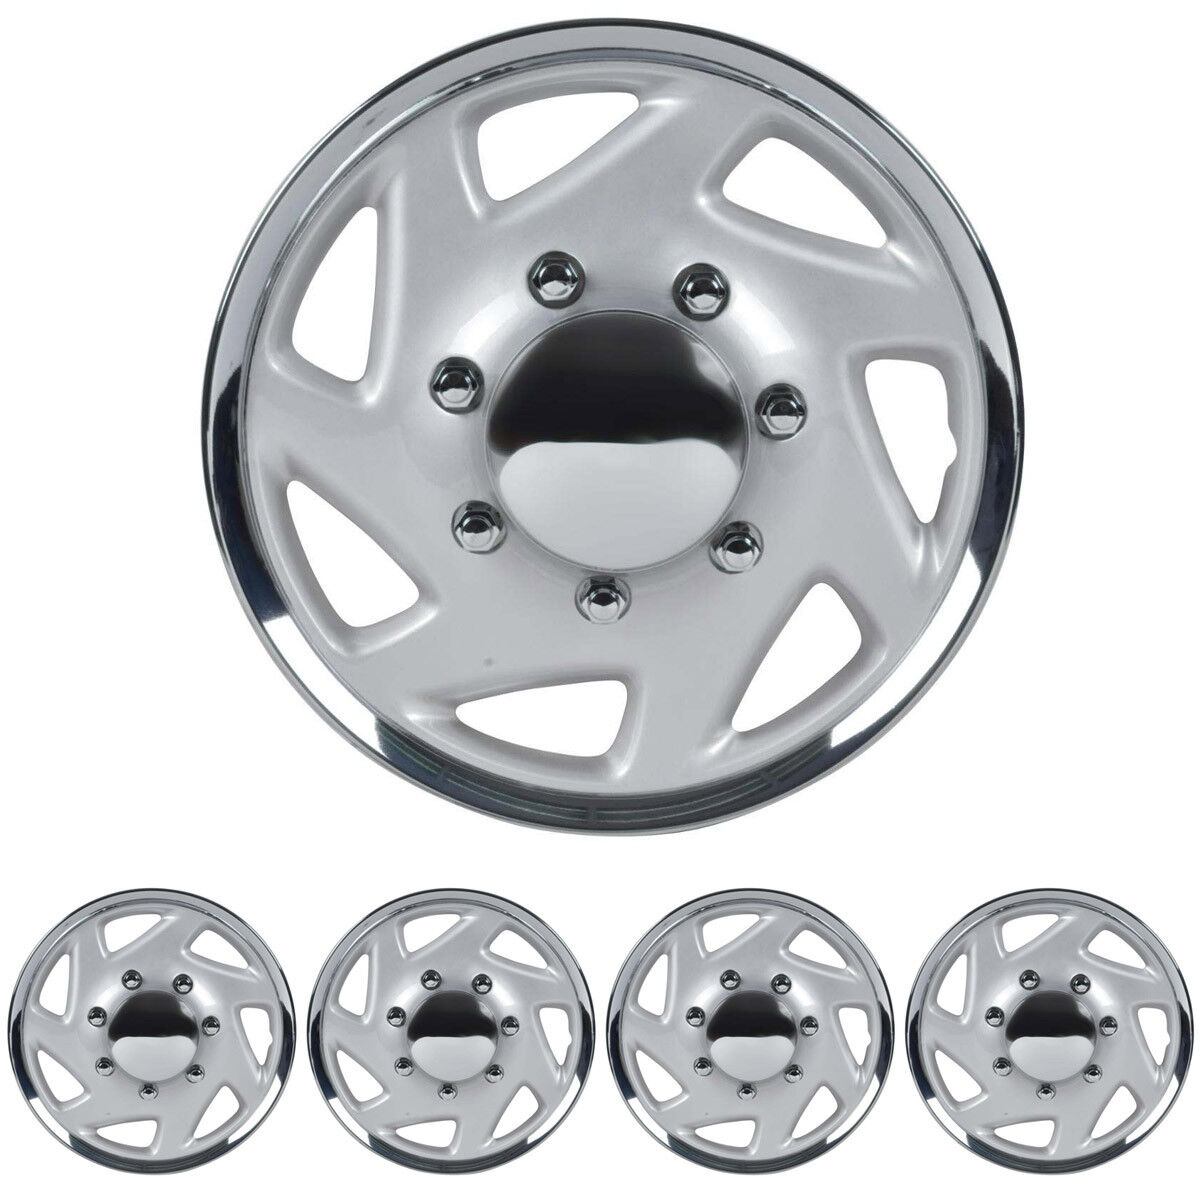 4 PC Hubcaps for Ford E-150 250 350 Truck Van 16